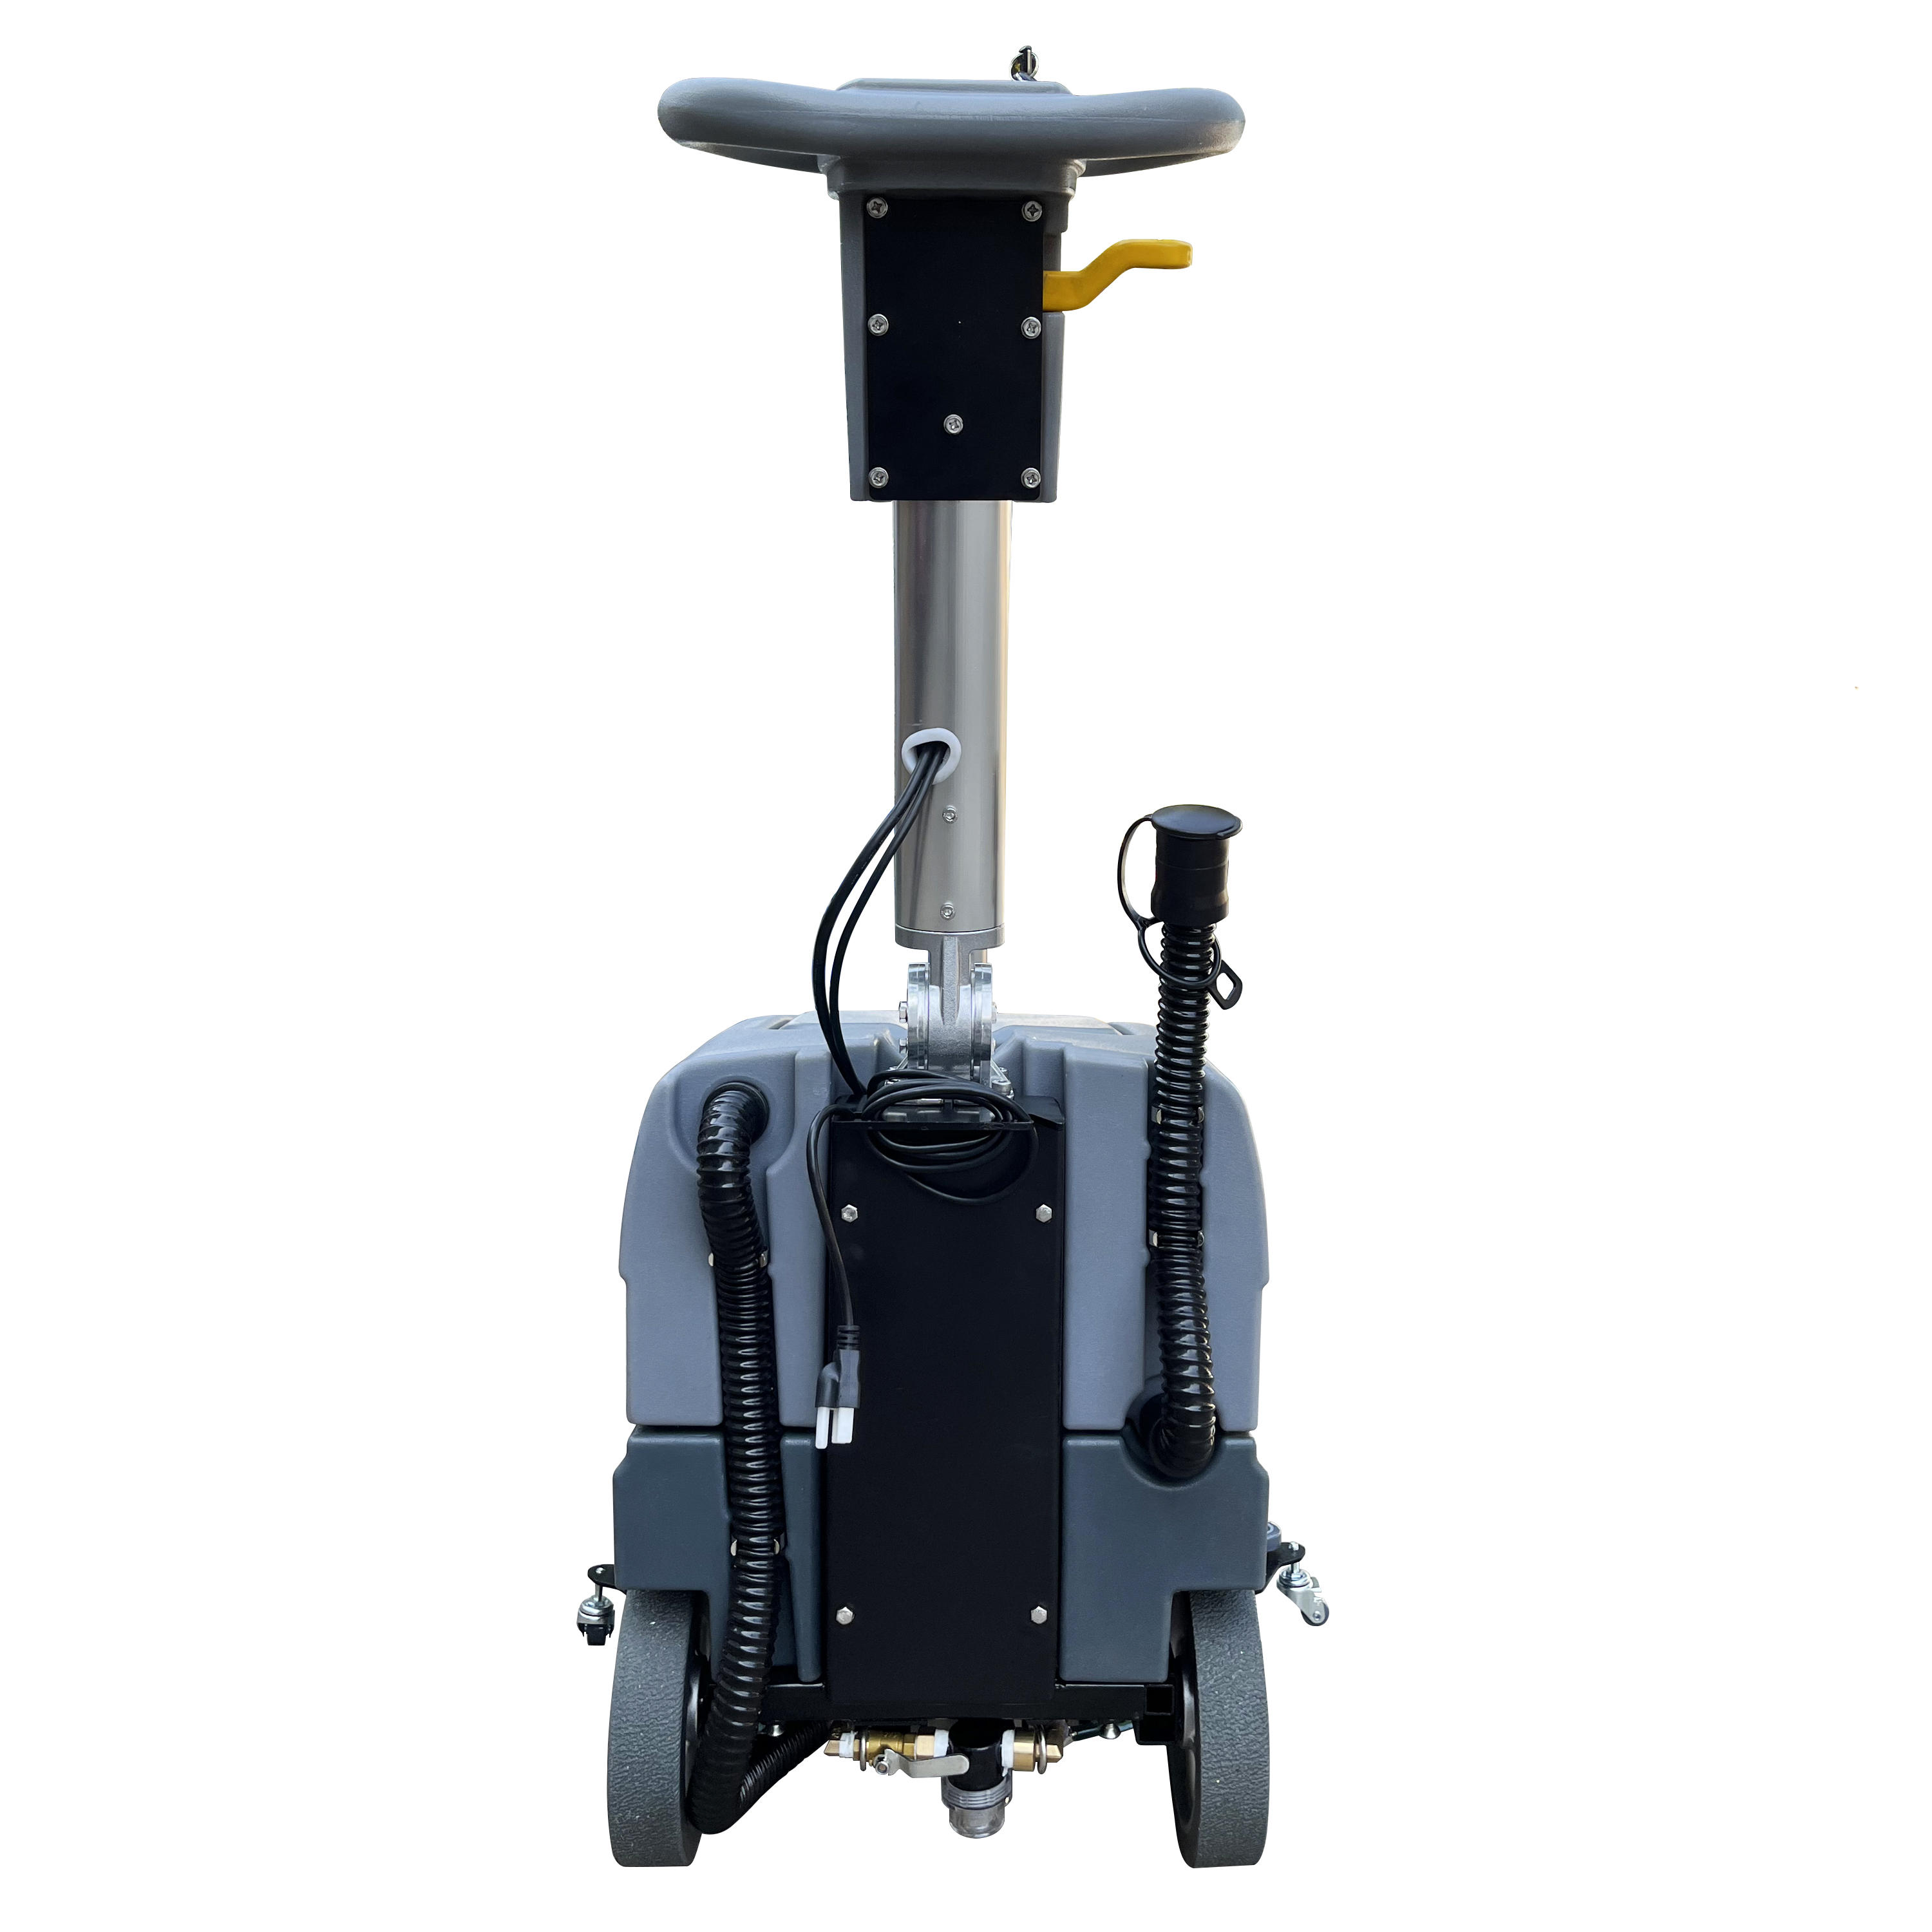 Emotor 15'' Foldable Walk Behind Hand Push Floor Scrubber Machine, Battery Powered with 15'' Rotary Brush and 23'' Squeegee, 32